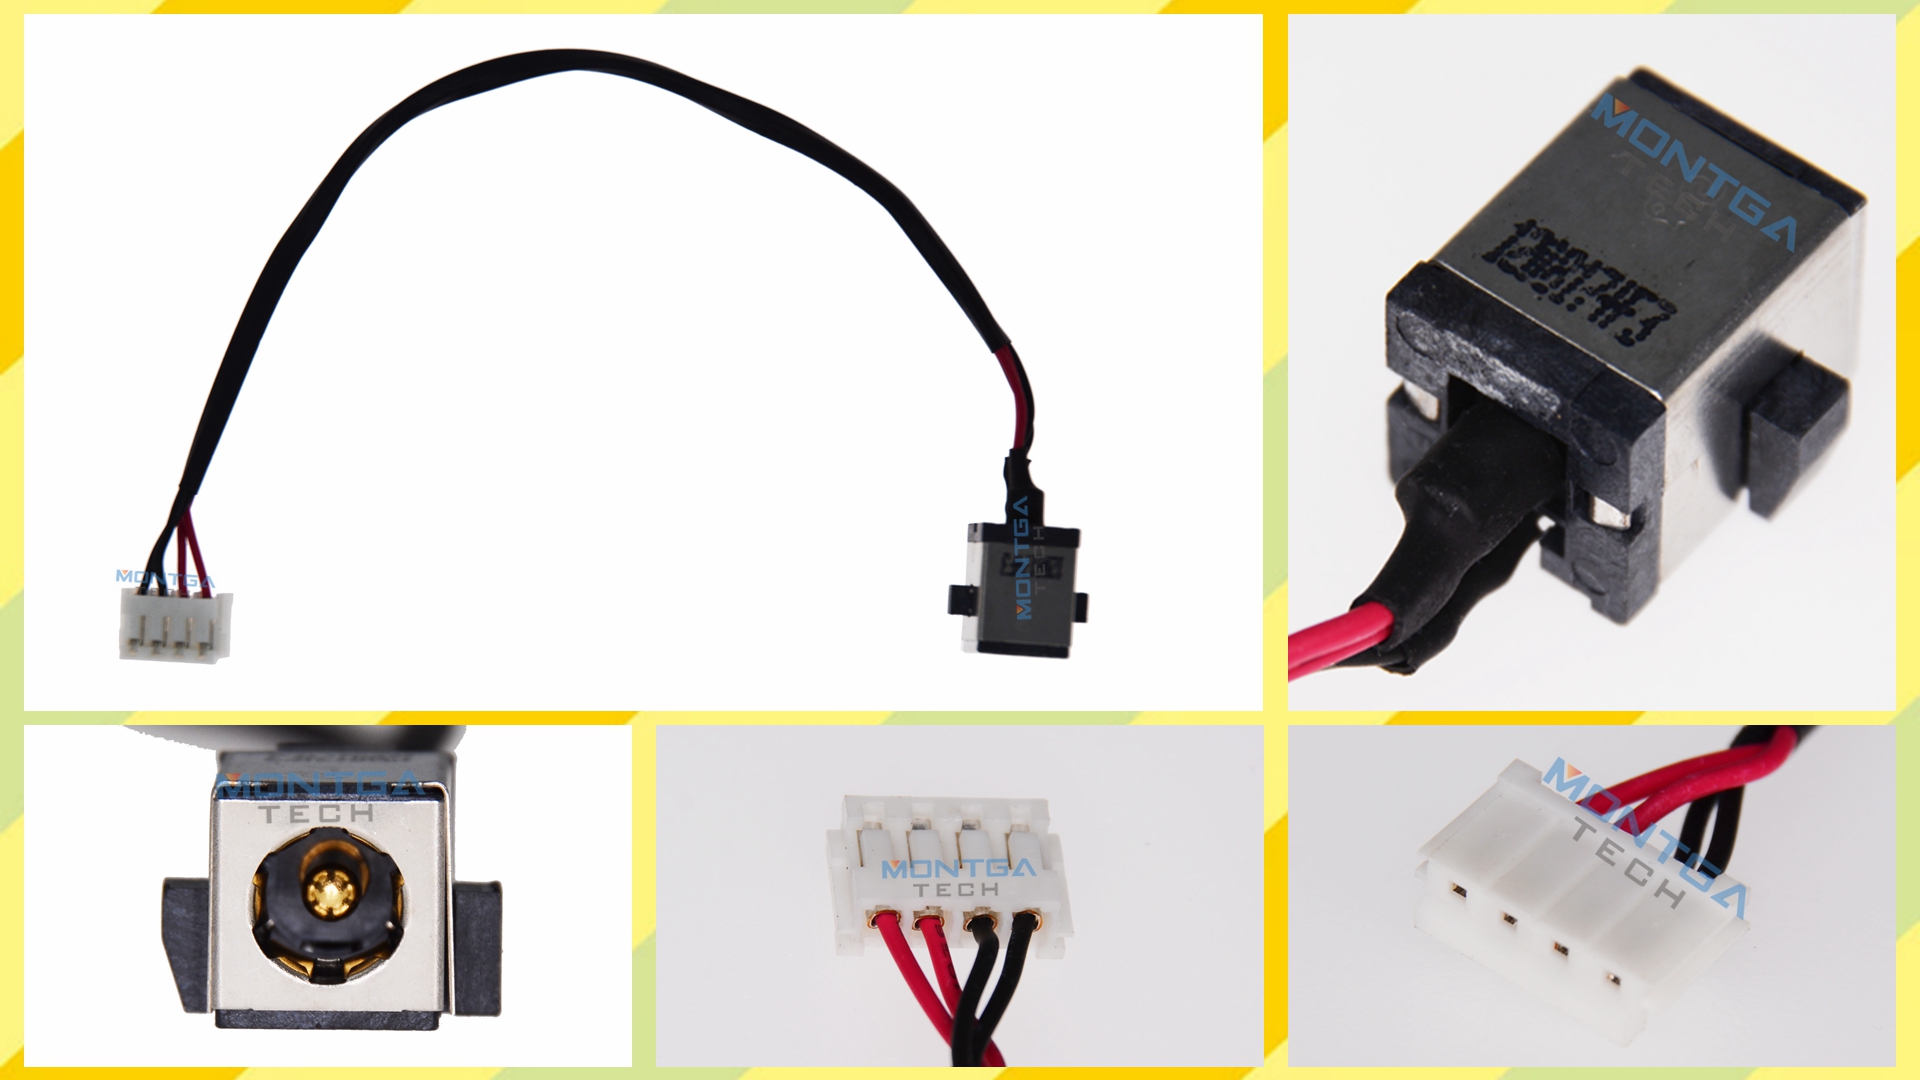 Asus R503C charging connector, Asus R503C DC Power Jack, Asus R503C DC IN Cable, Asus R503C Power Jack, Asus R503C plug, Asus R503C Jack socket, Asus R503C connecteur de charge, 